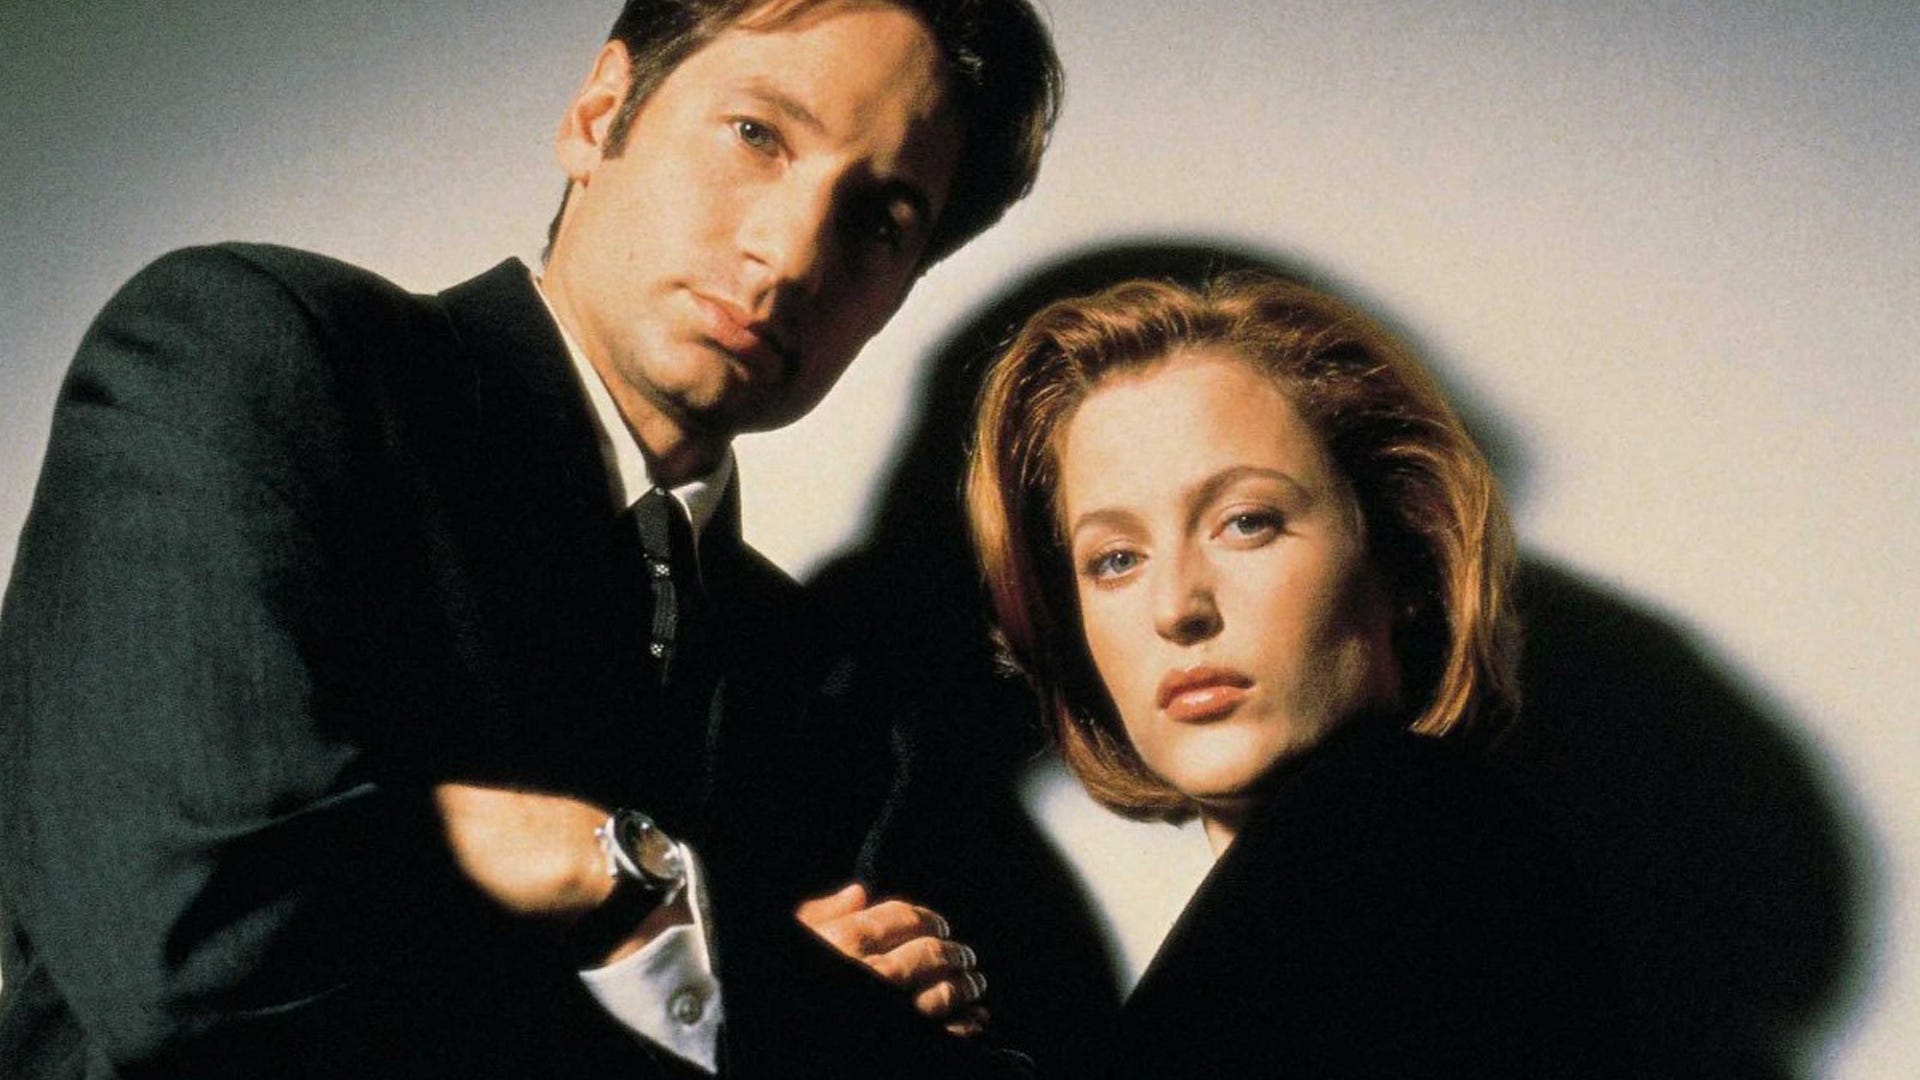 X-Files’ creator thinks the upcoming reboot will be tough because “everything’s a conspiracy now”